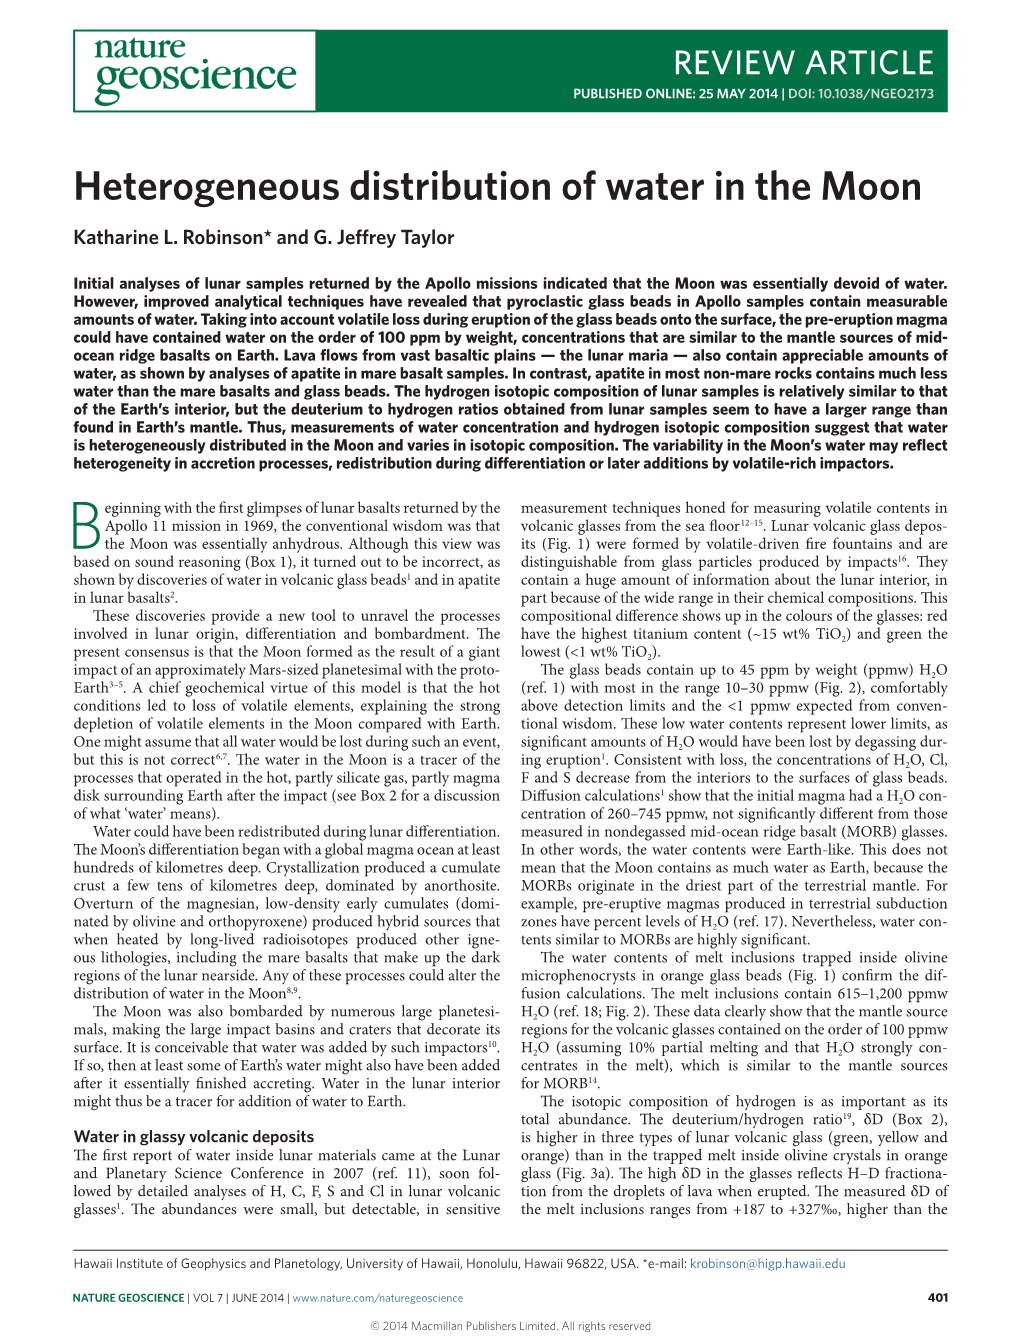 Heterogeneous Distribution of Water in the Moon Katharine L